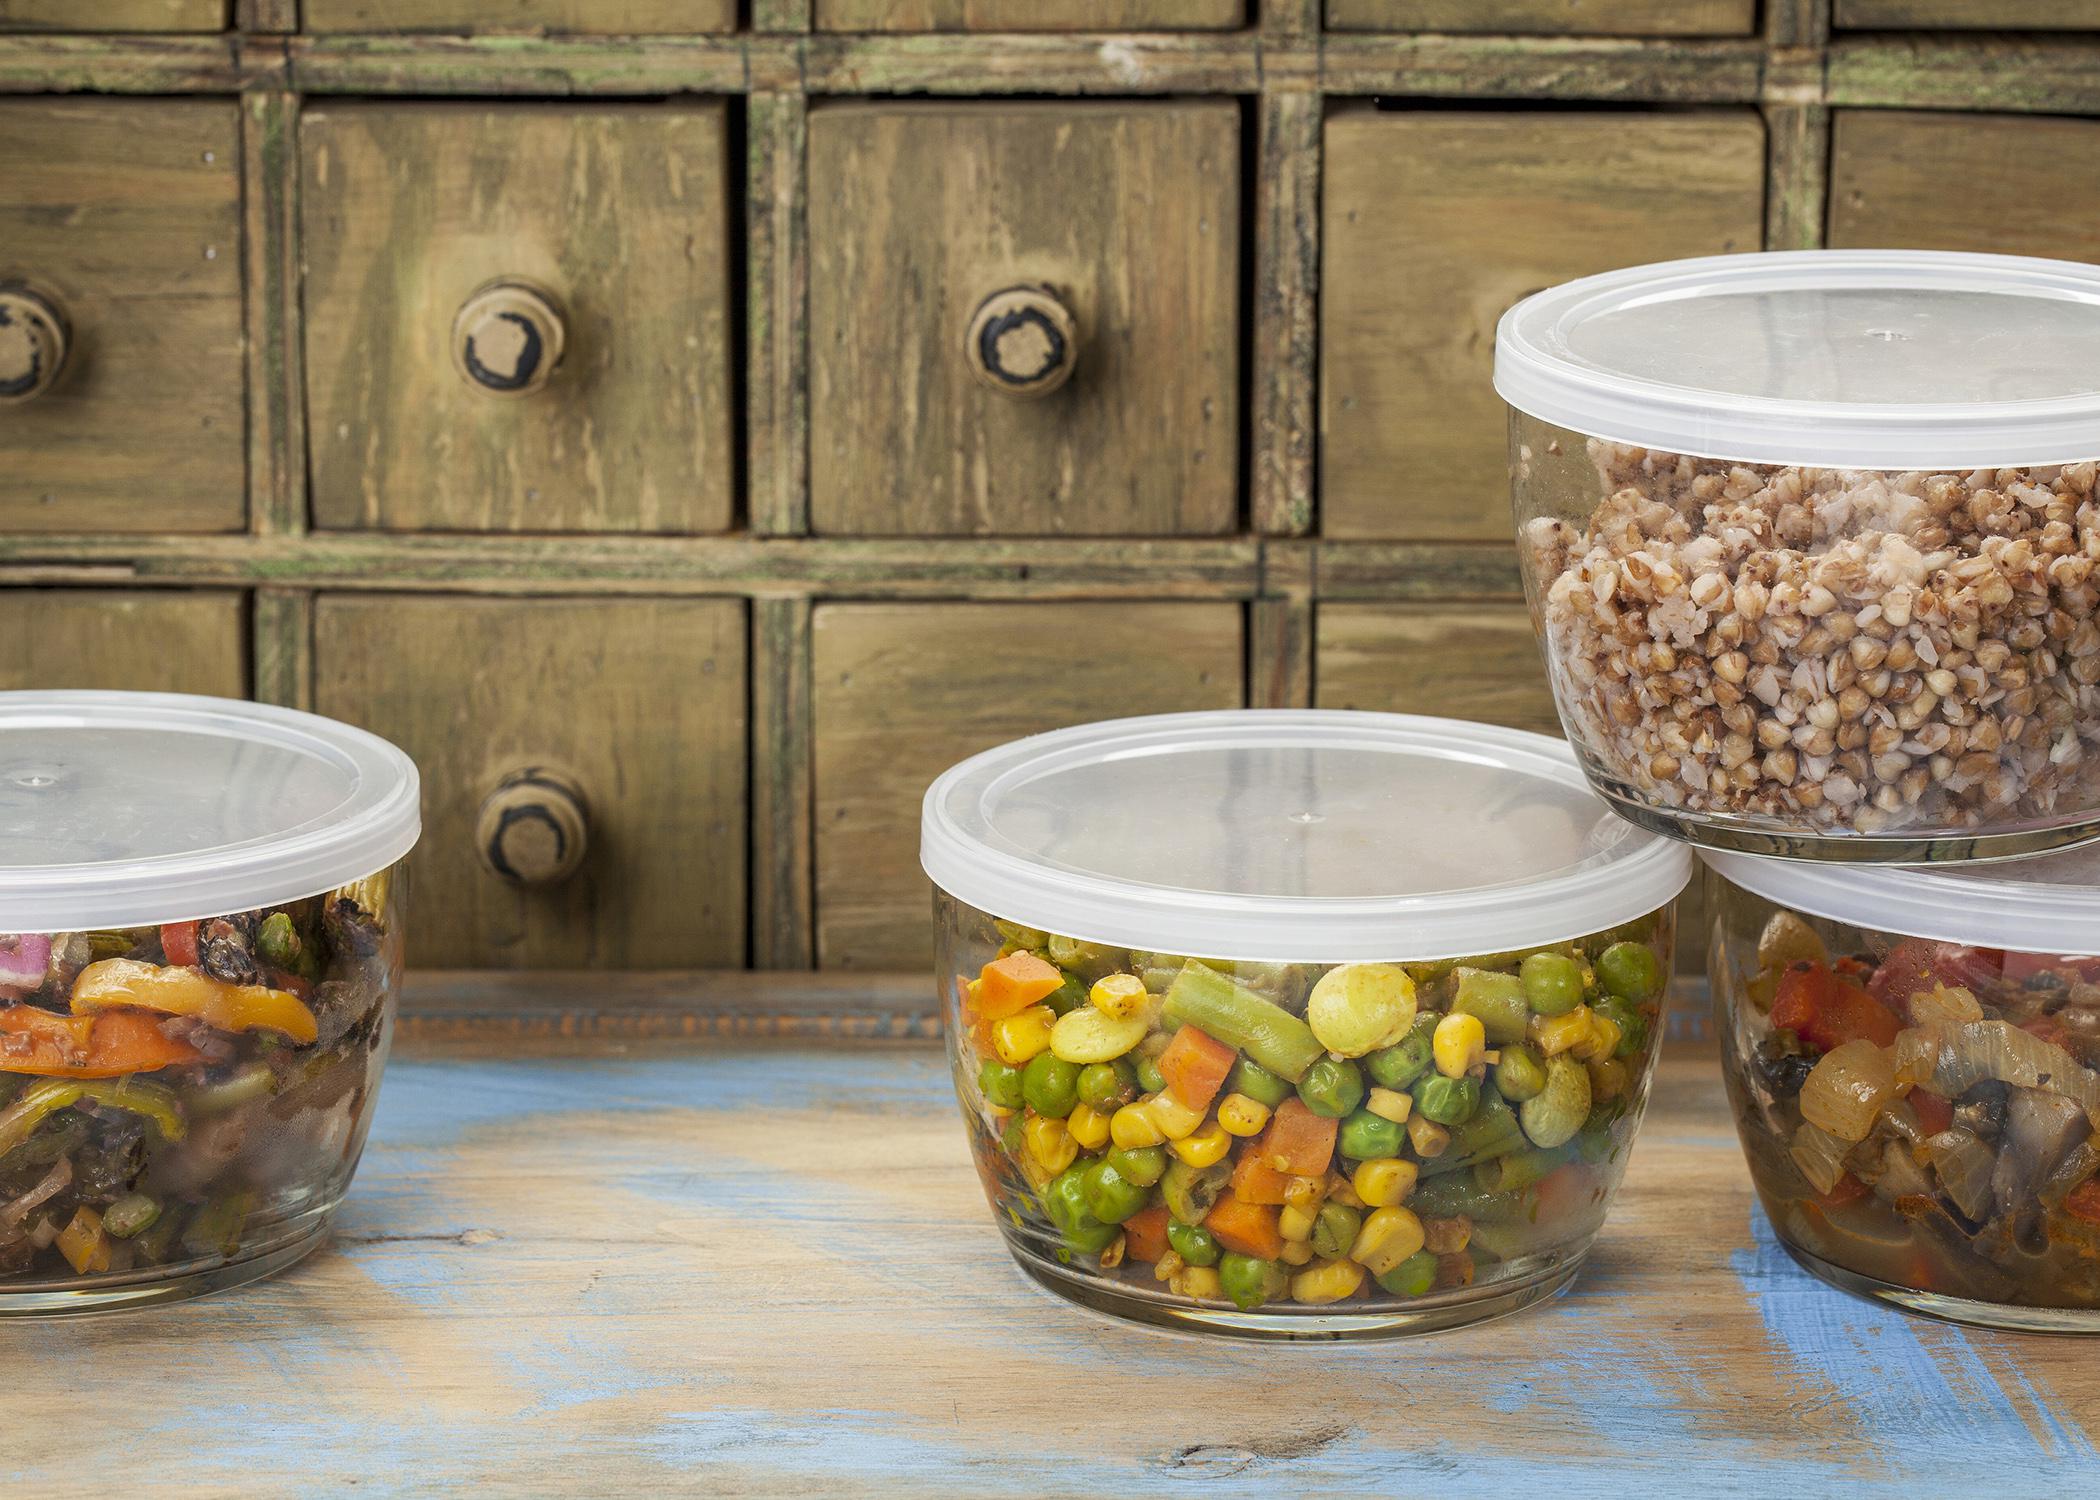 Four glass containers with plastic lids contain food leftovers.